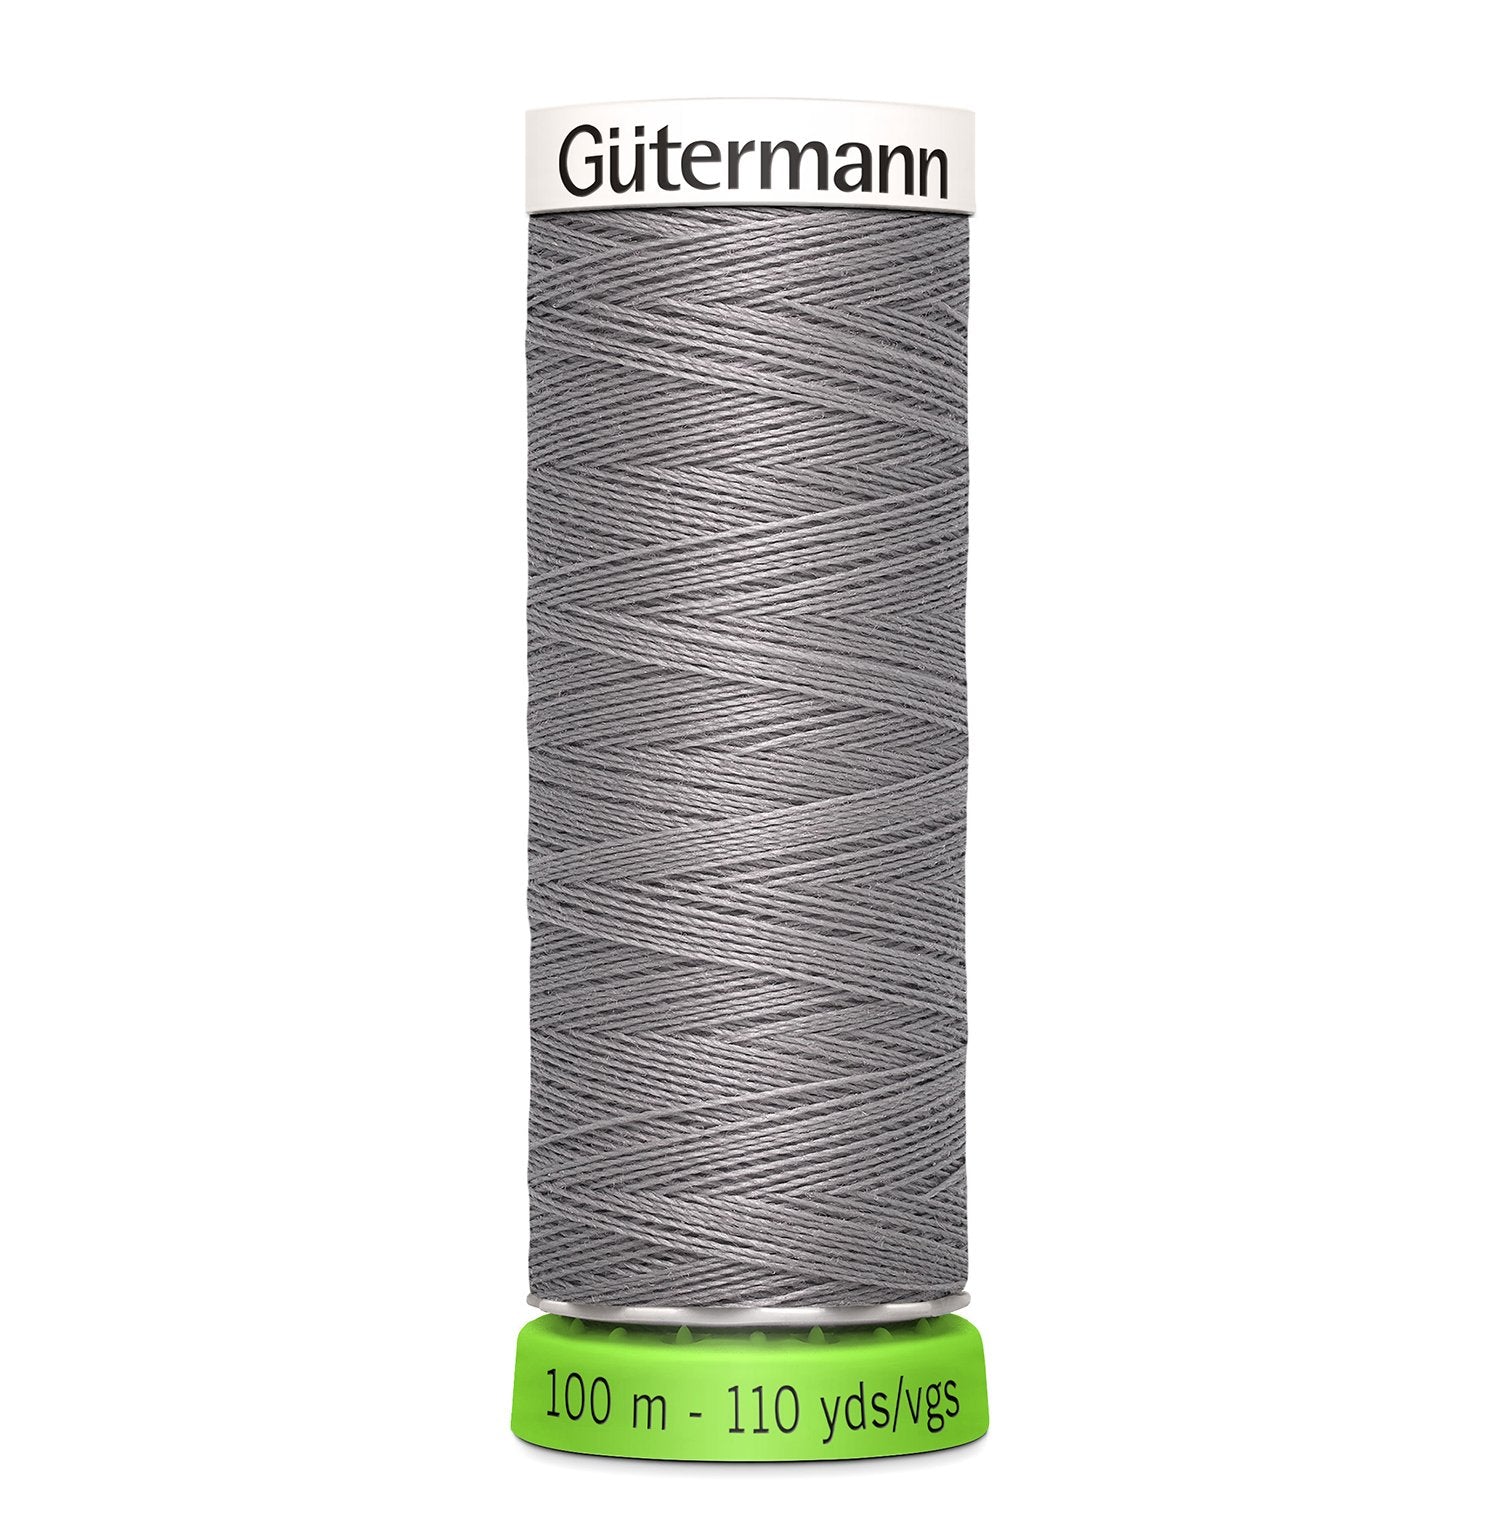 Gutermann Recycled Thread 100m, Colour 493 from Jaycotts Sewing Supplies